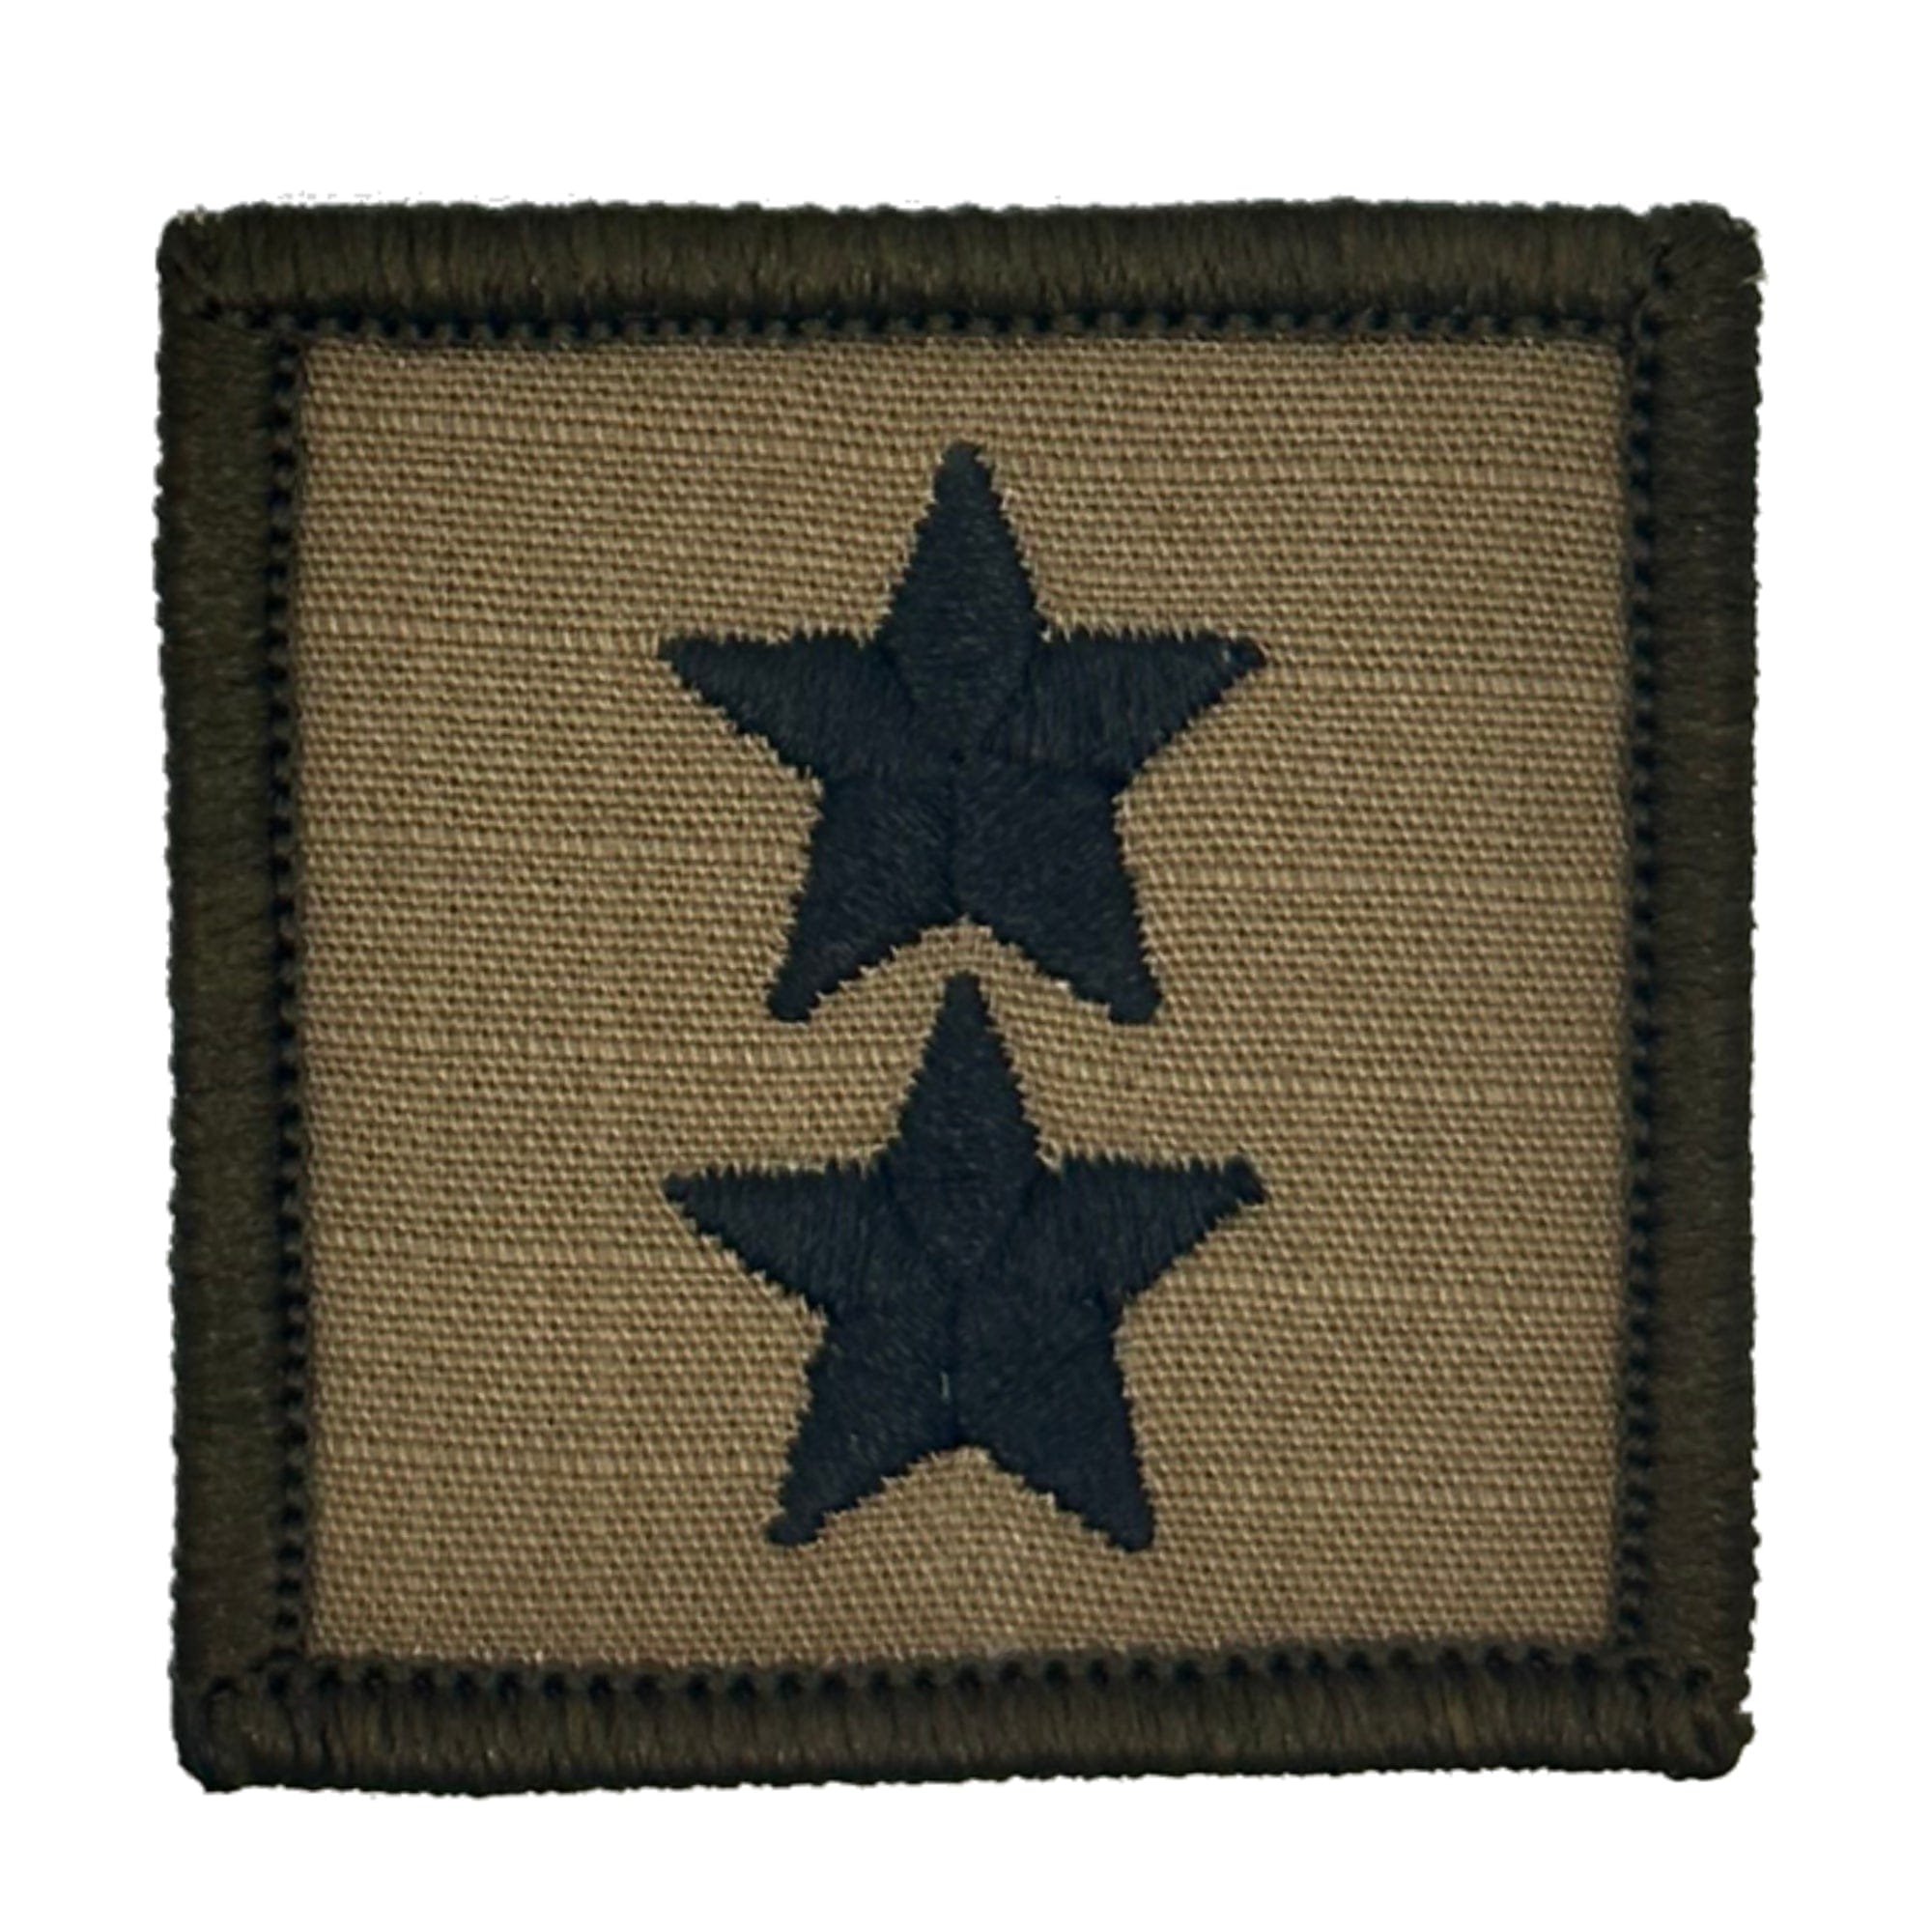 Tactical Gear Junkie Patches Coyote Brown / Major General USMC Rank Insignia - 2x2 Patch